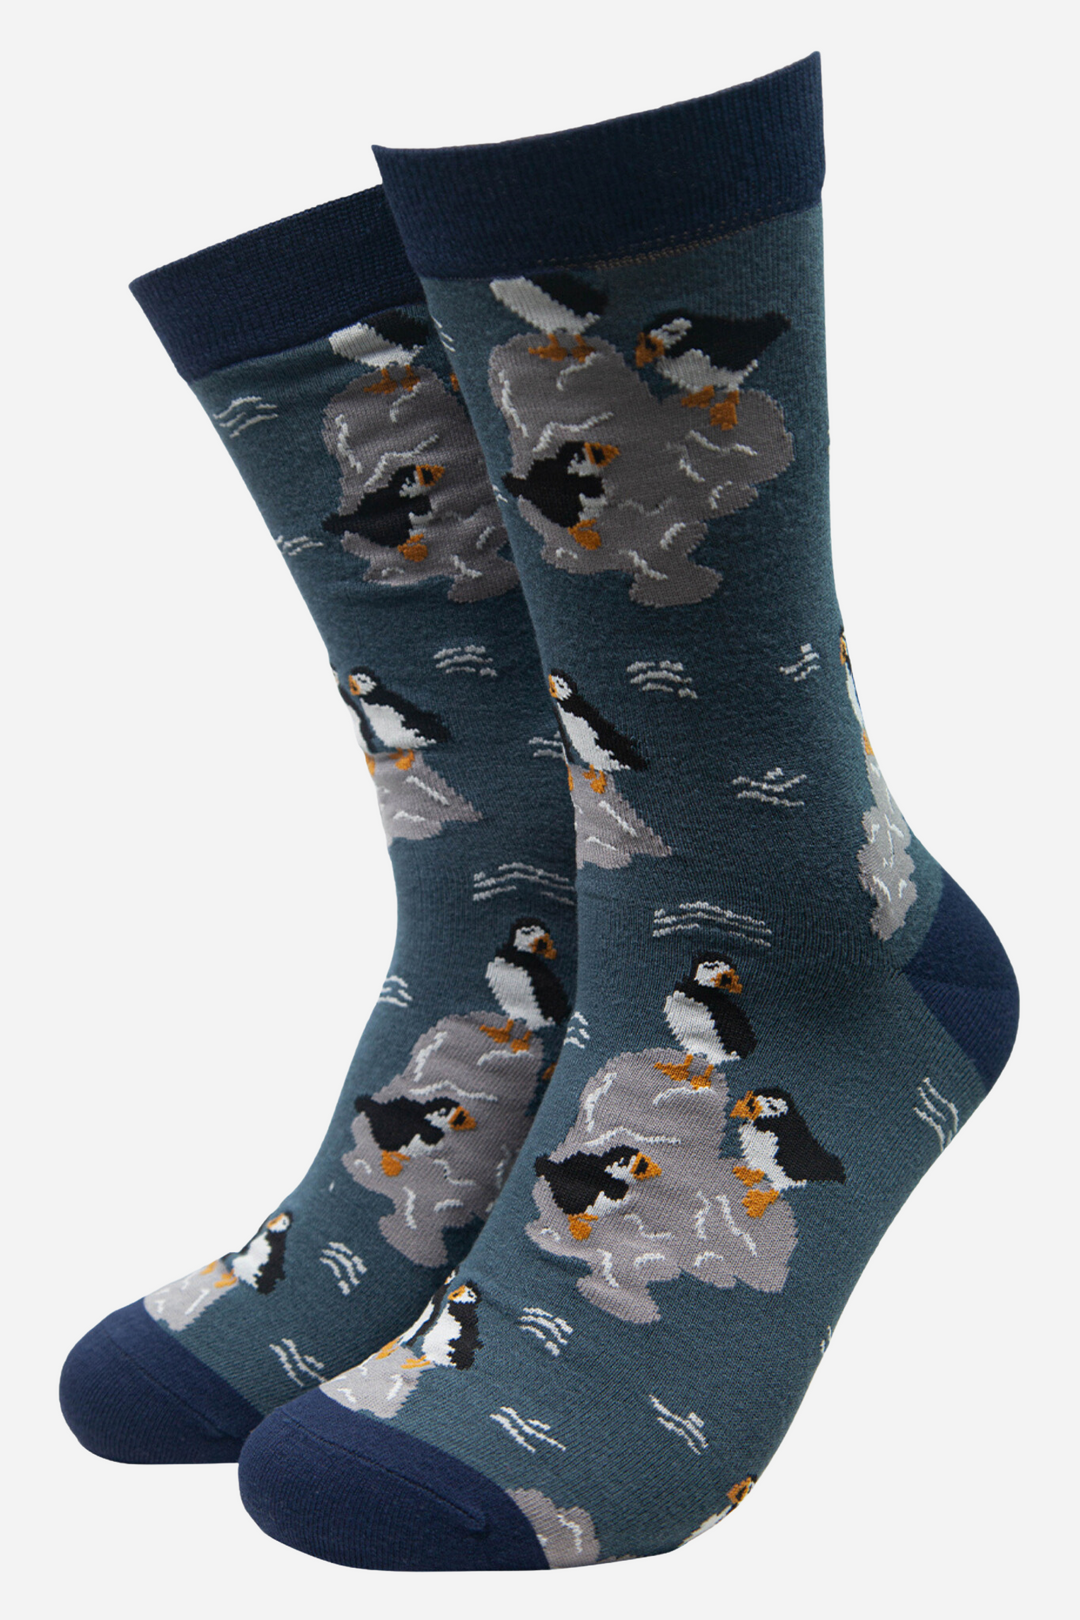 teal bamboo socks with a pattern of puffin seabirds sitting on rocks